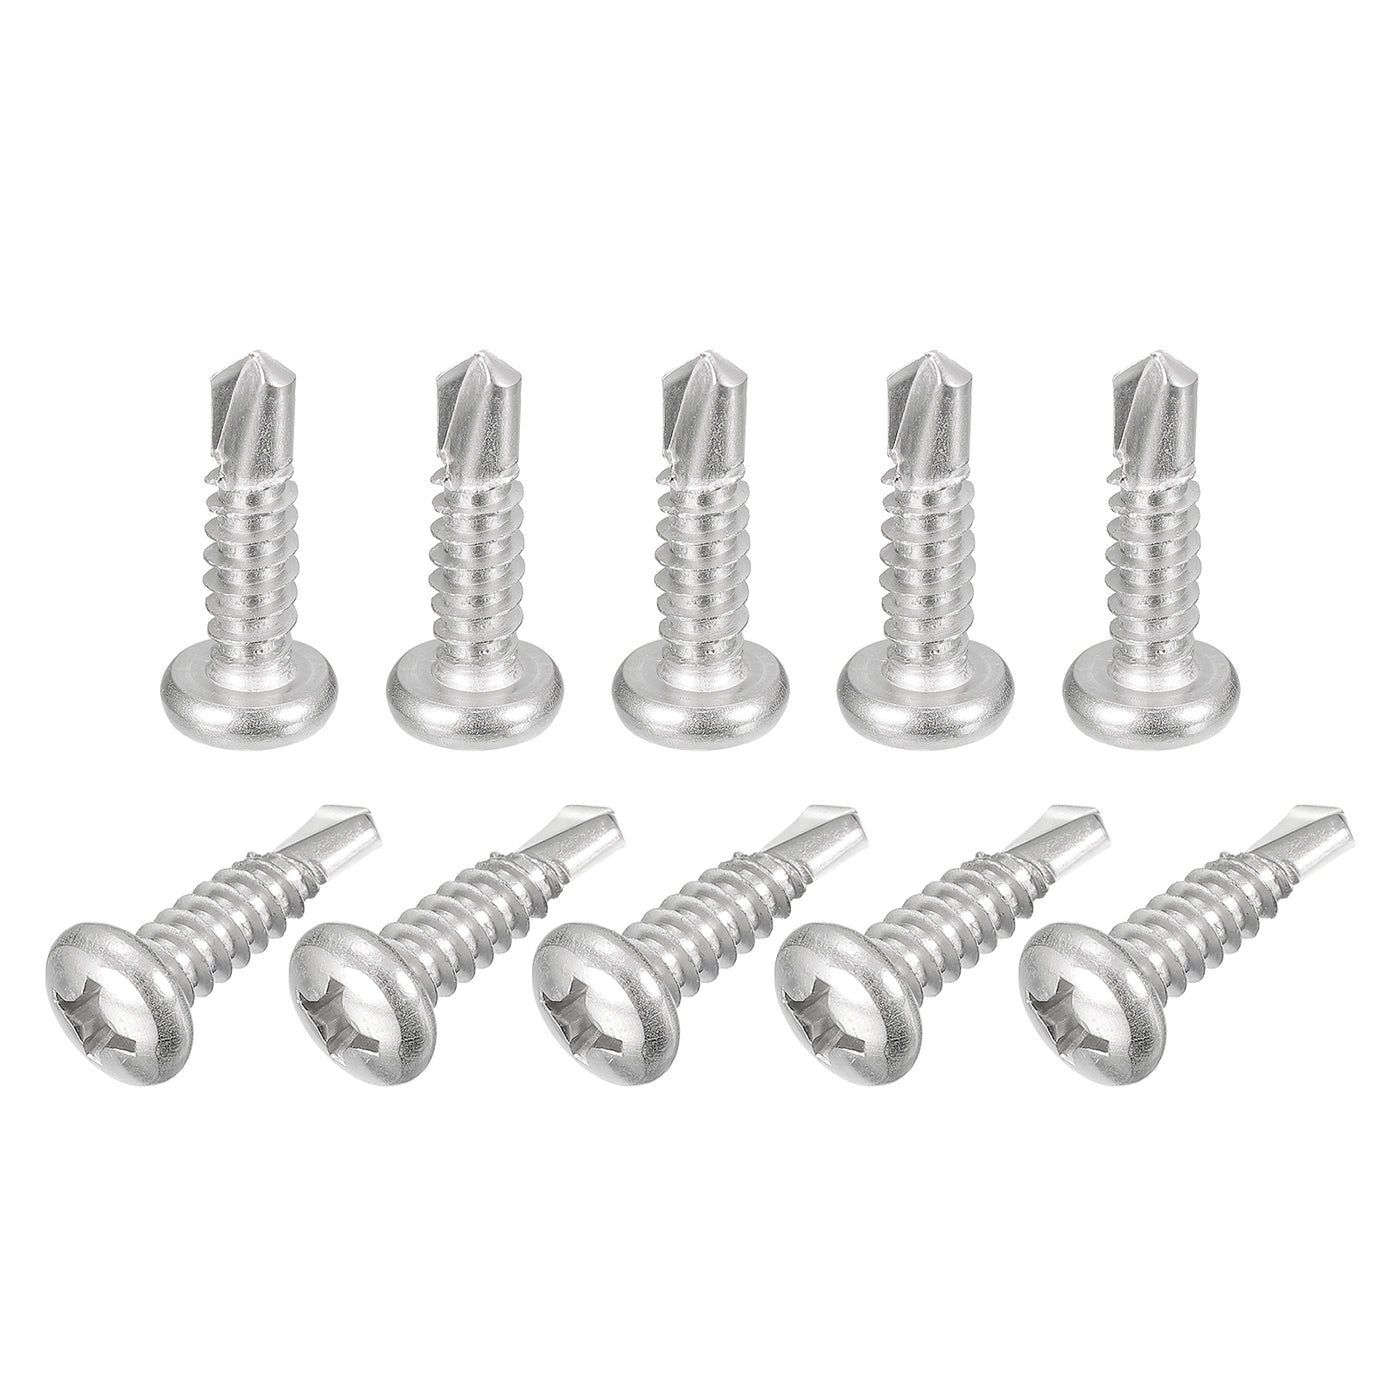 uxcell Uxcell #14 x 1" Self Drilling Screws, 50pcs Phillips Pan Head Self Tapping Screws